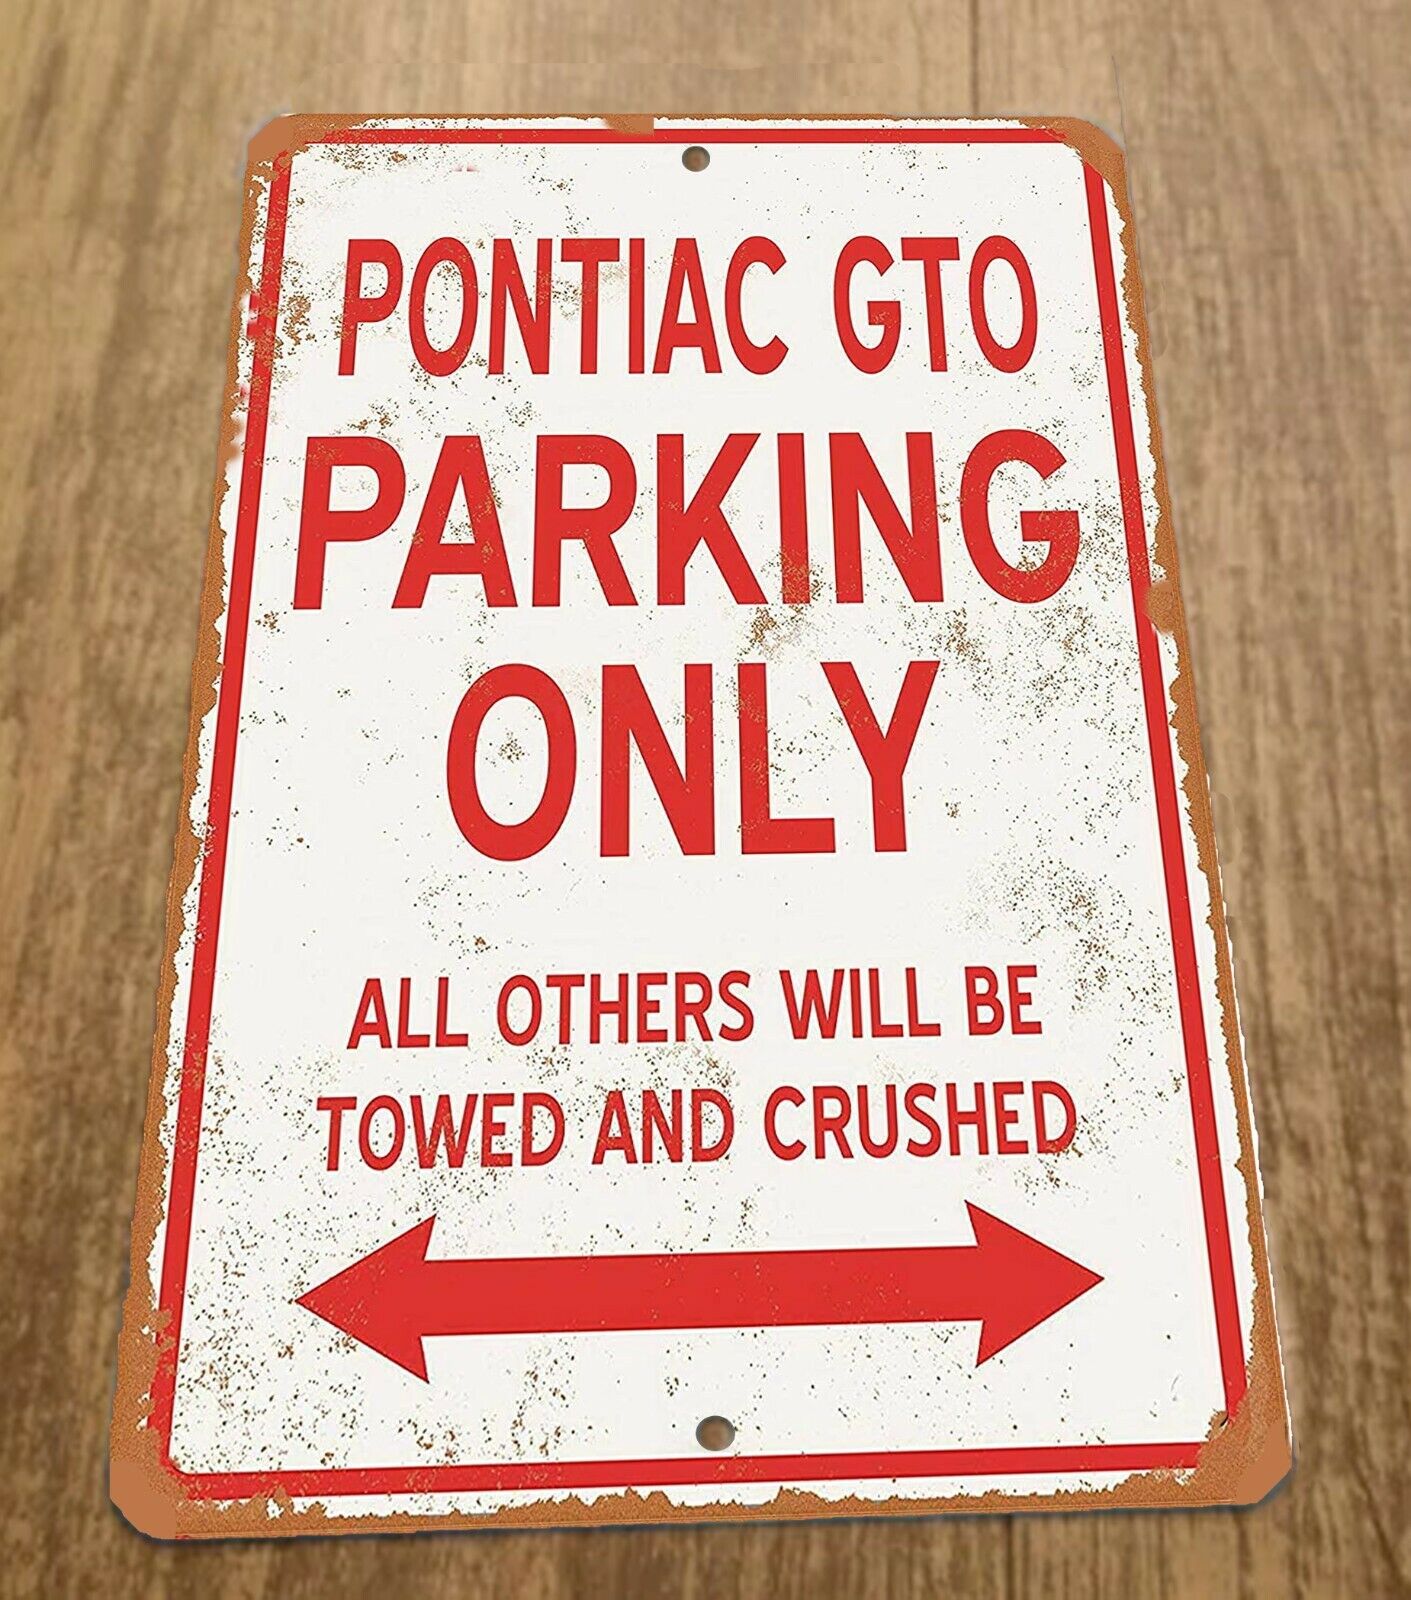 Pontiac GTO Parking Only All Others Will be Towed and Crushed 8x12 Metal Car Sign Garage Poster